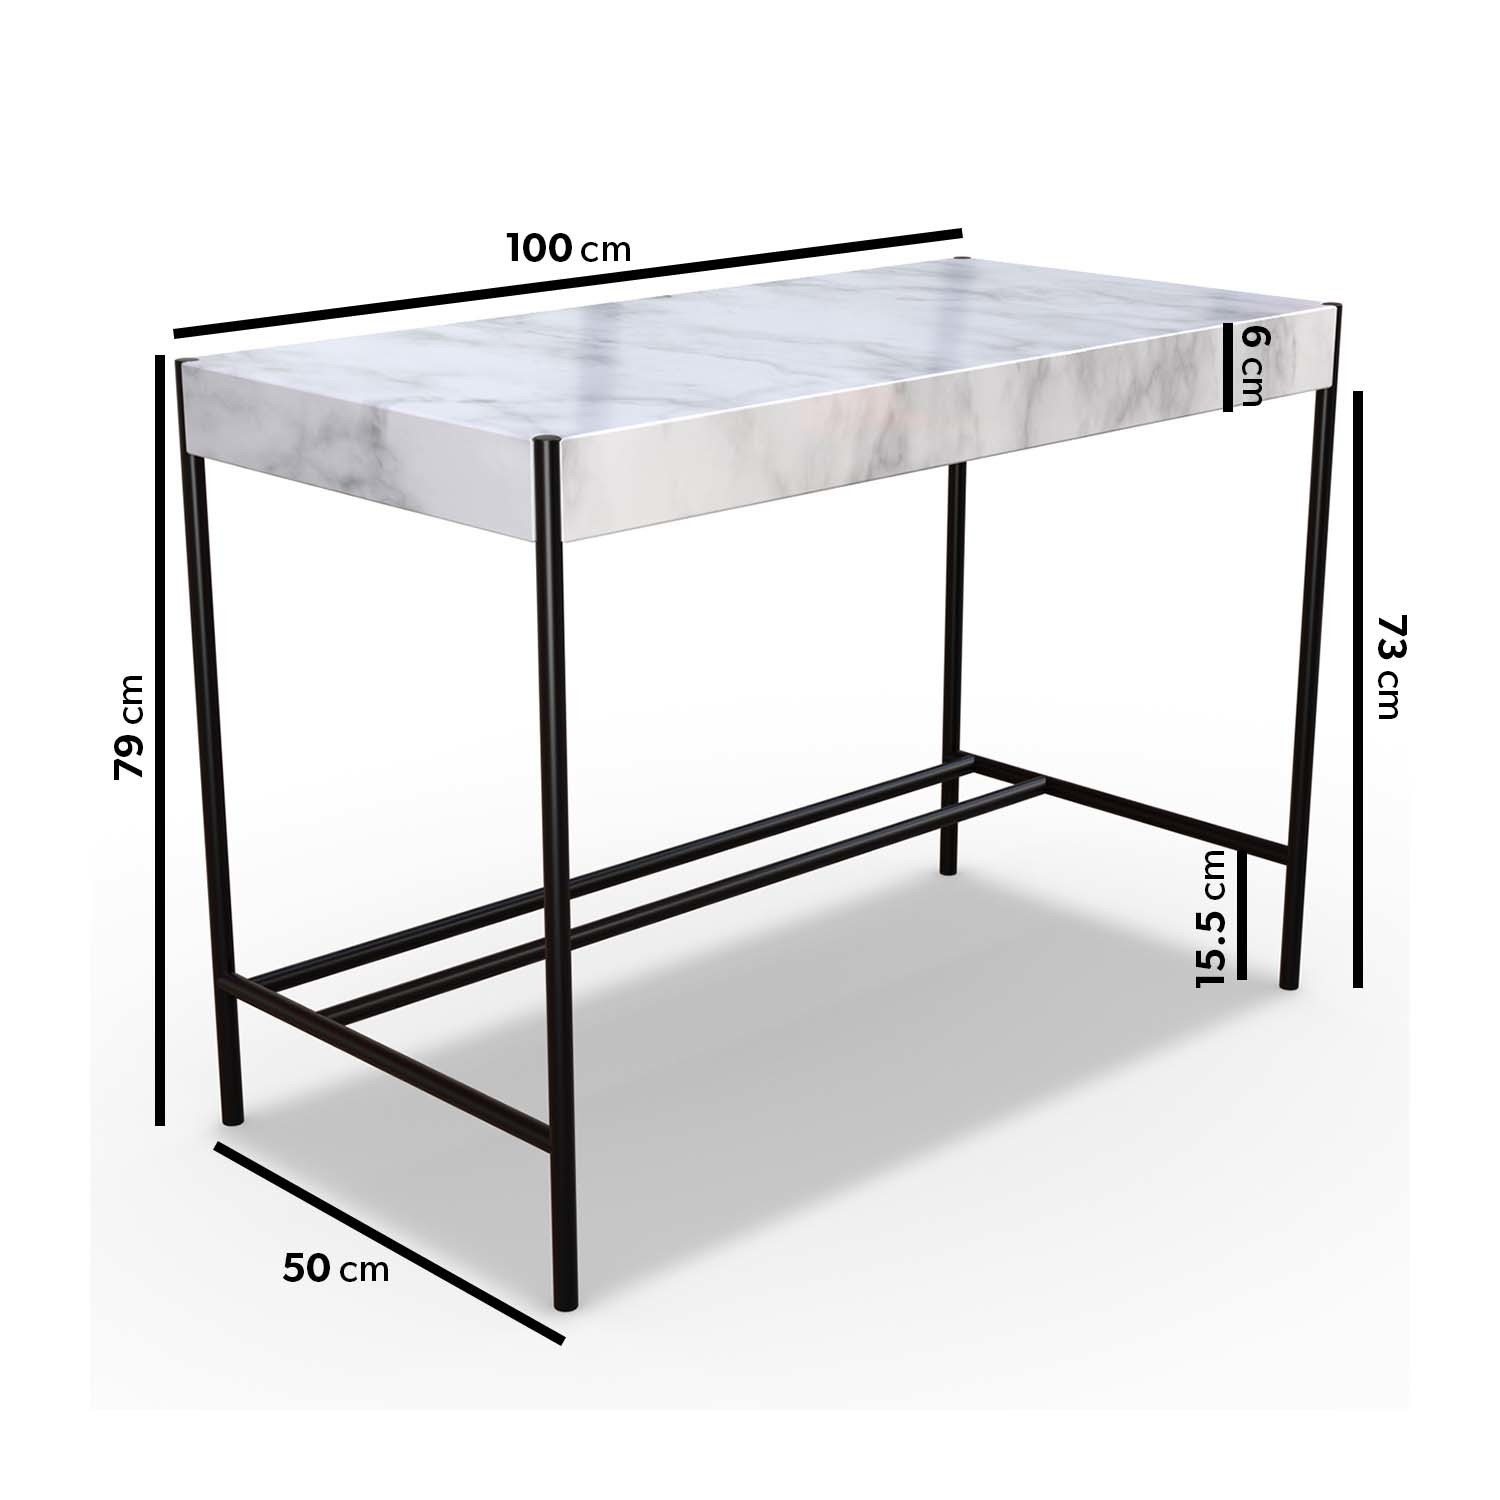 Read more about Small white marble effect office desk roxy